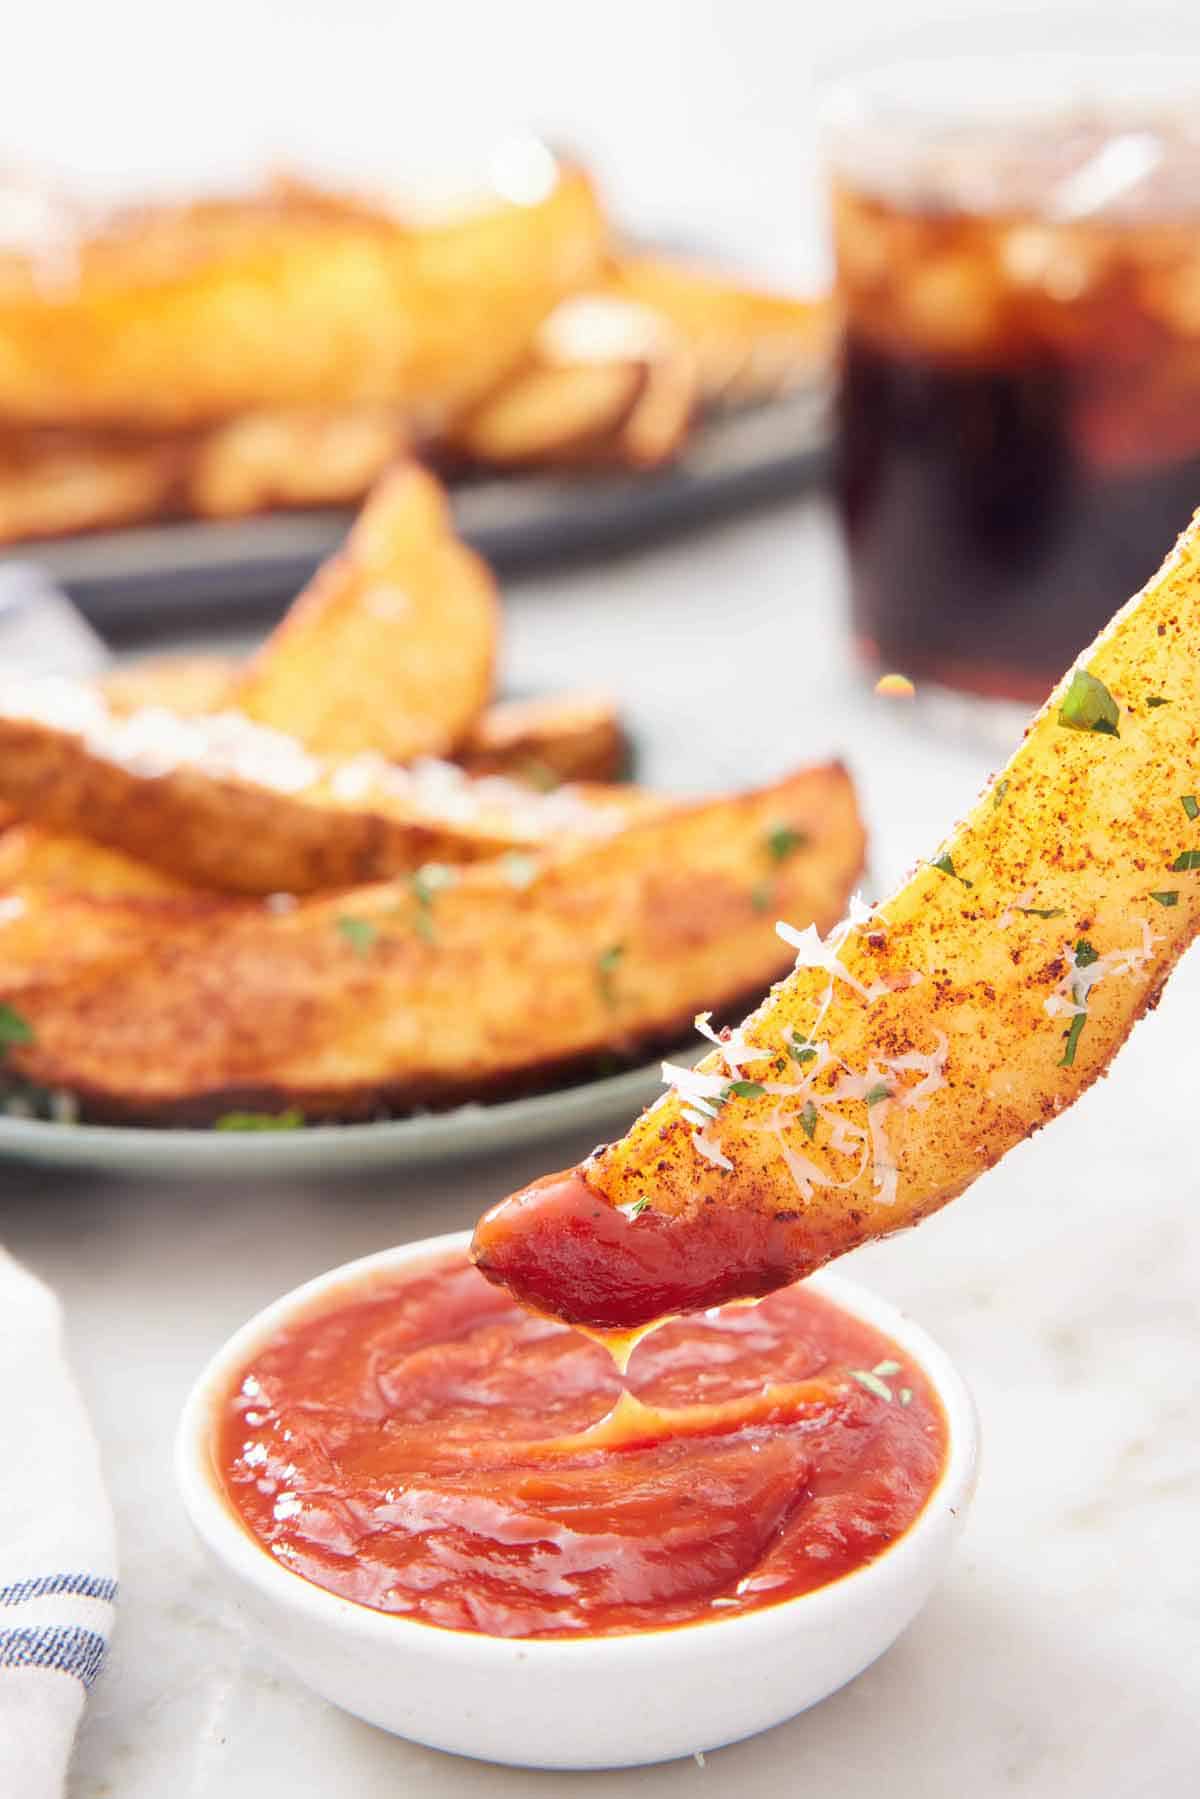 An air fryer potato wedge dipped into a bowl of ketchup. More wedges in the background and a glass of soda.